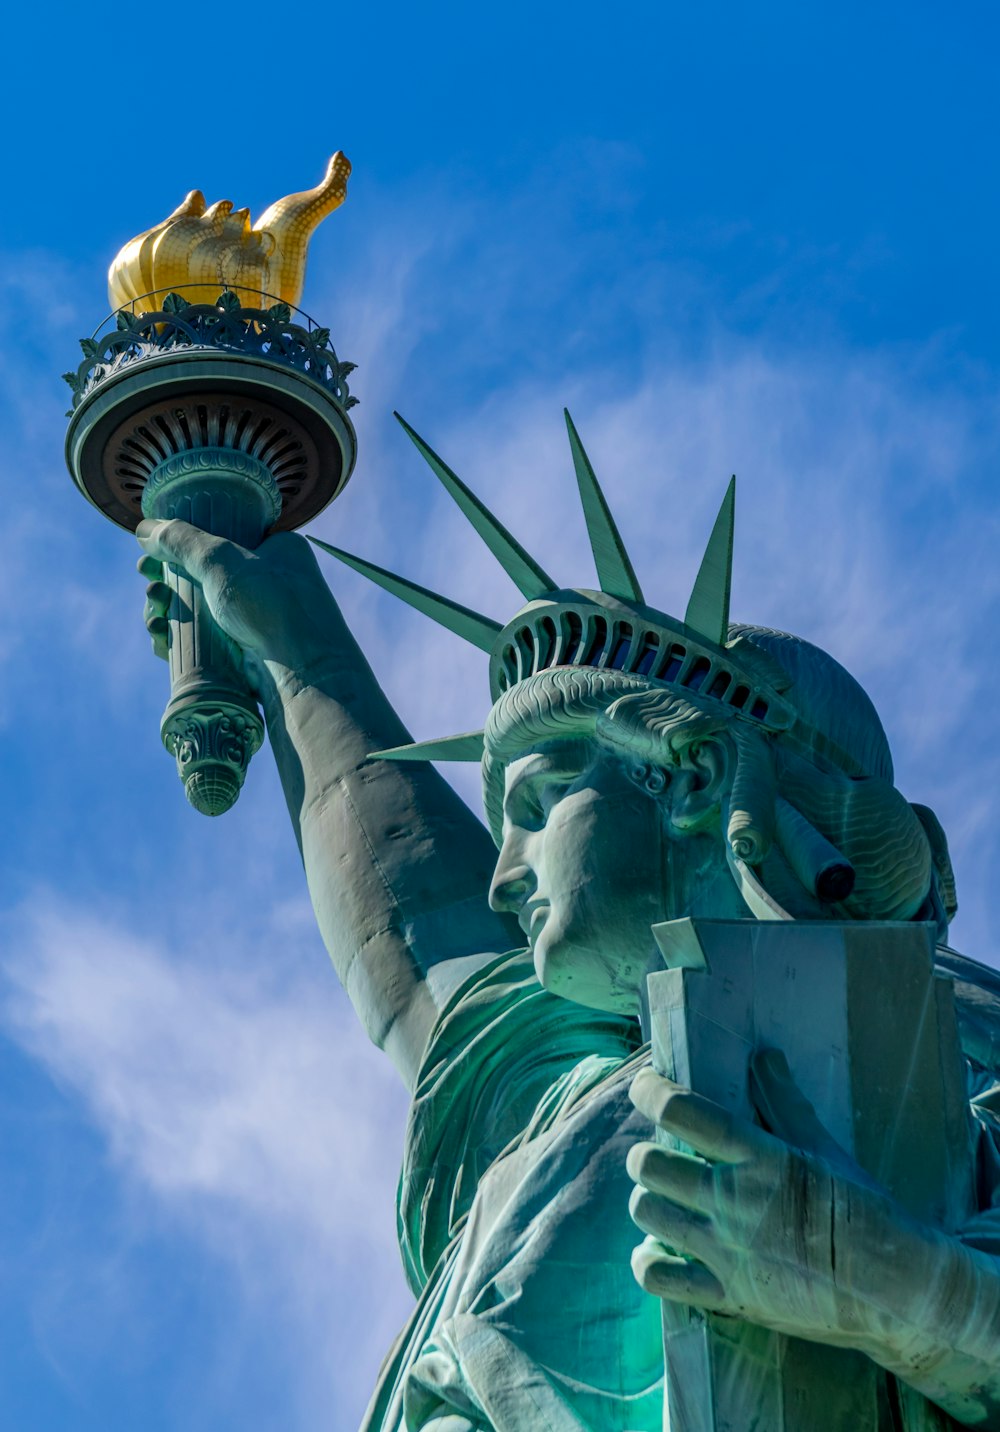 Statue of Liberty during daytime close-up photography